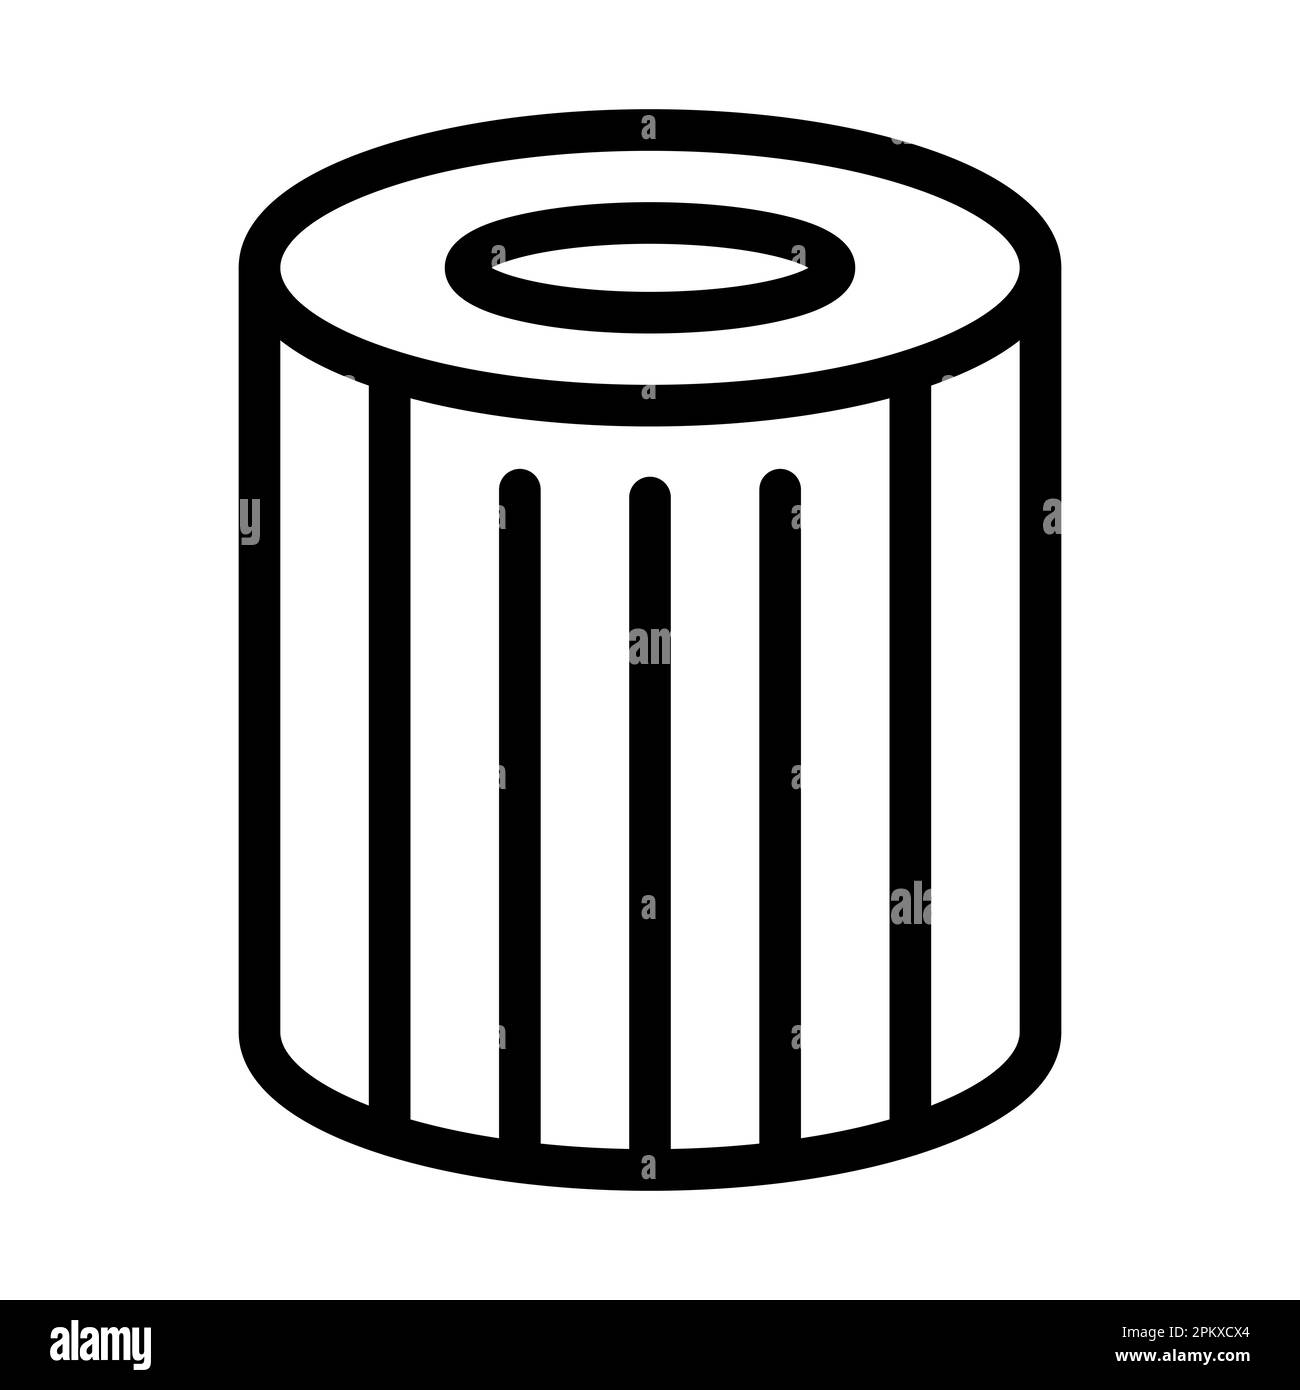 Air Filter Vector Thick Line Icon For Personal And Commercial Use. Stock Photo